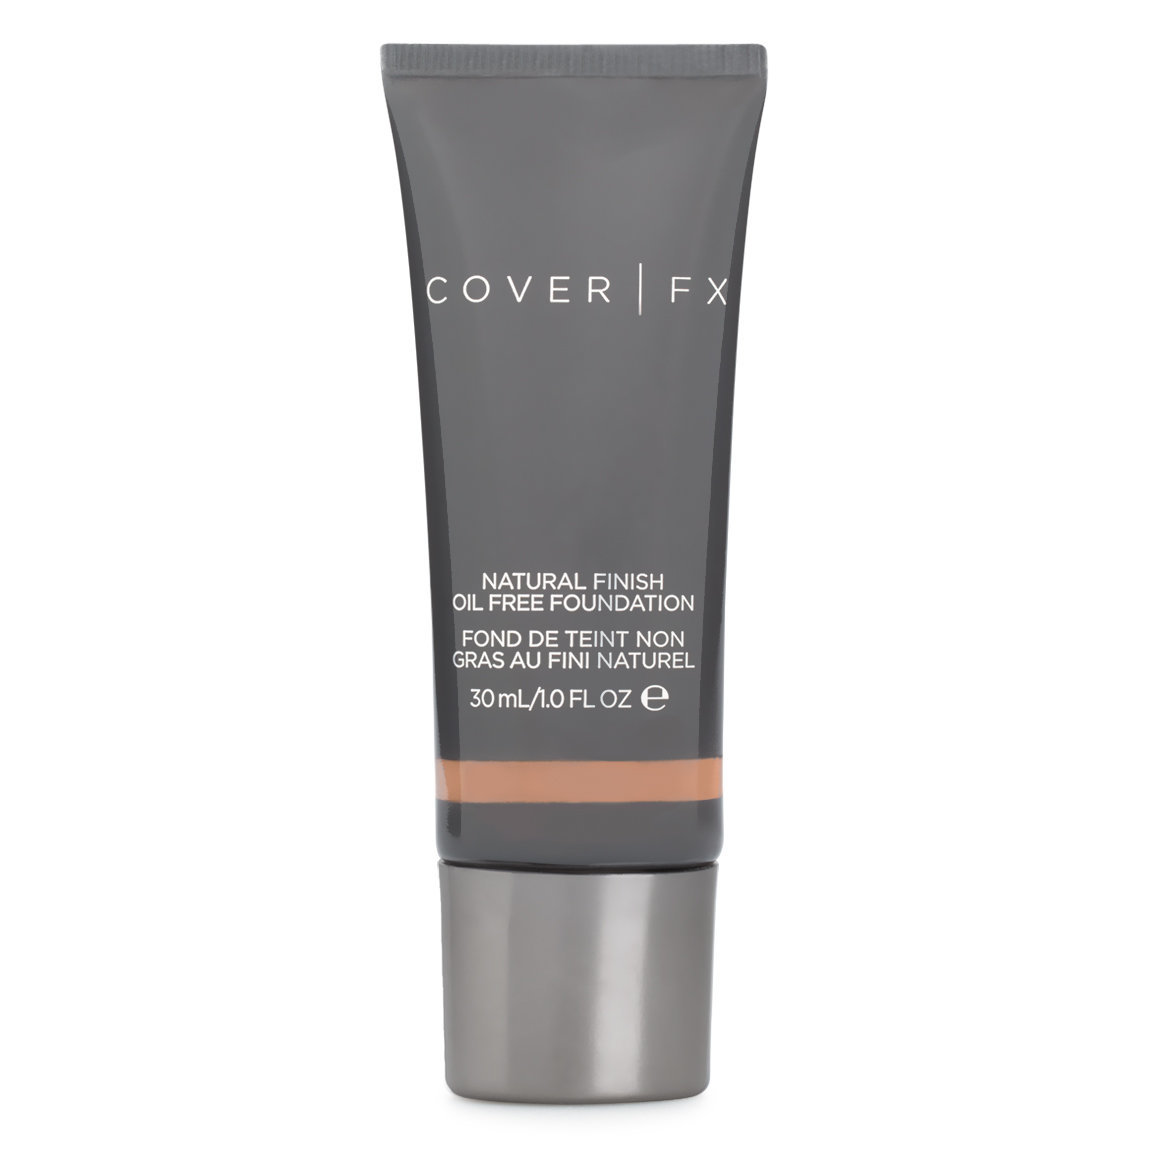 COVER | FX Natural Finish Oil Free Foundation N85 alternative view 1.